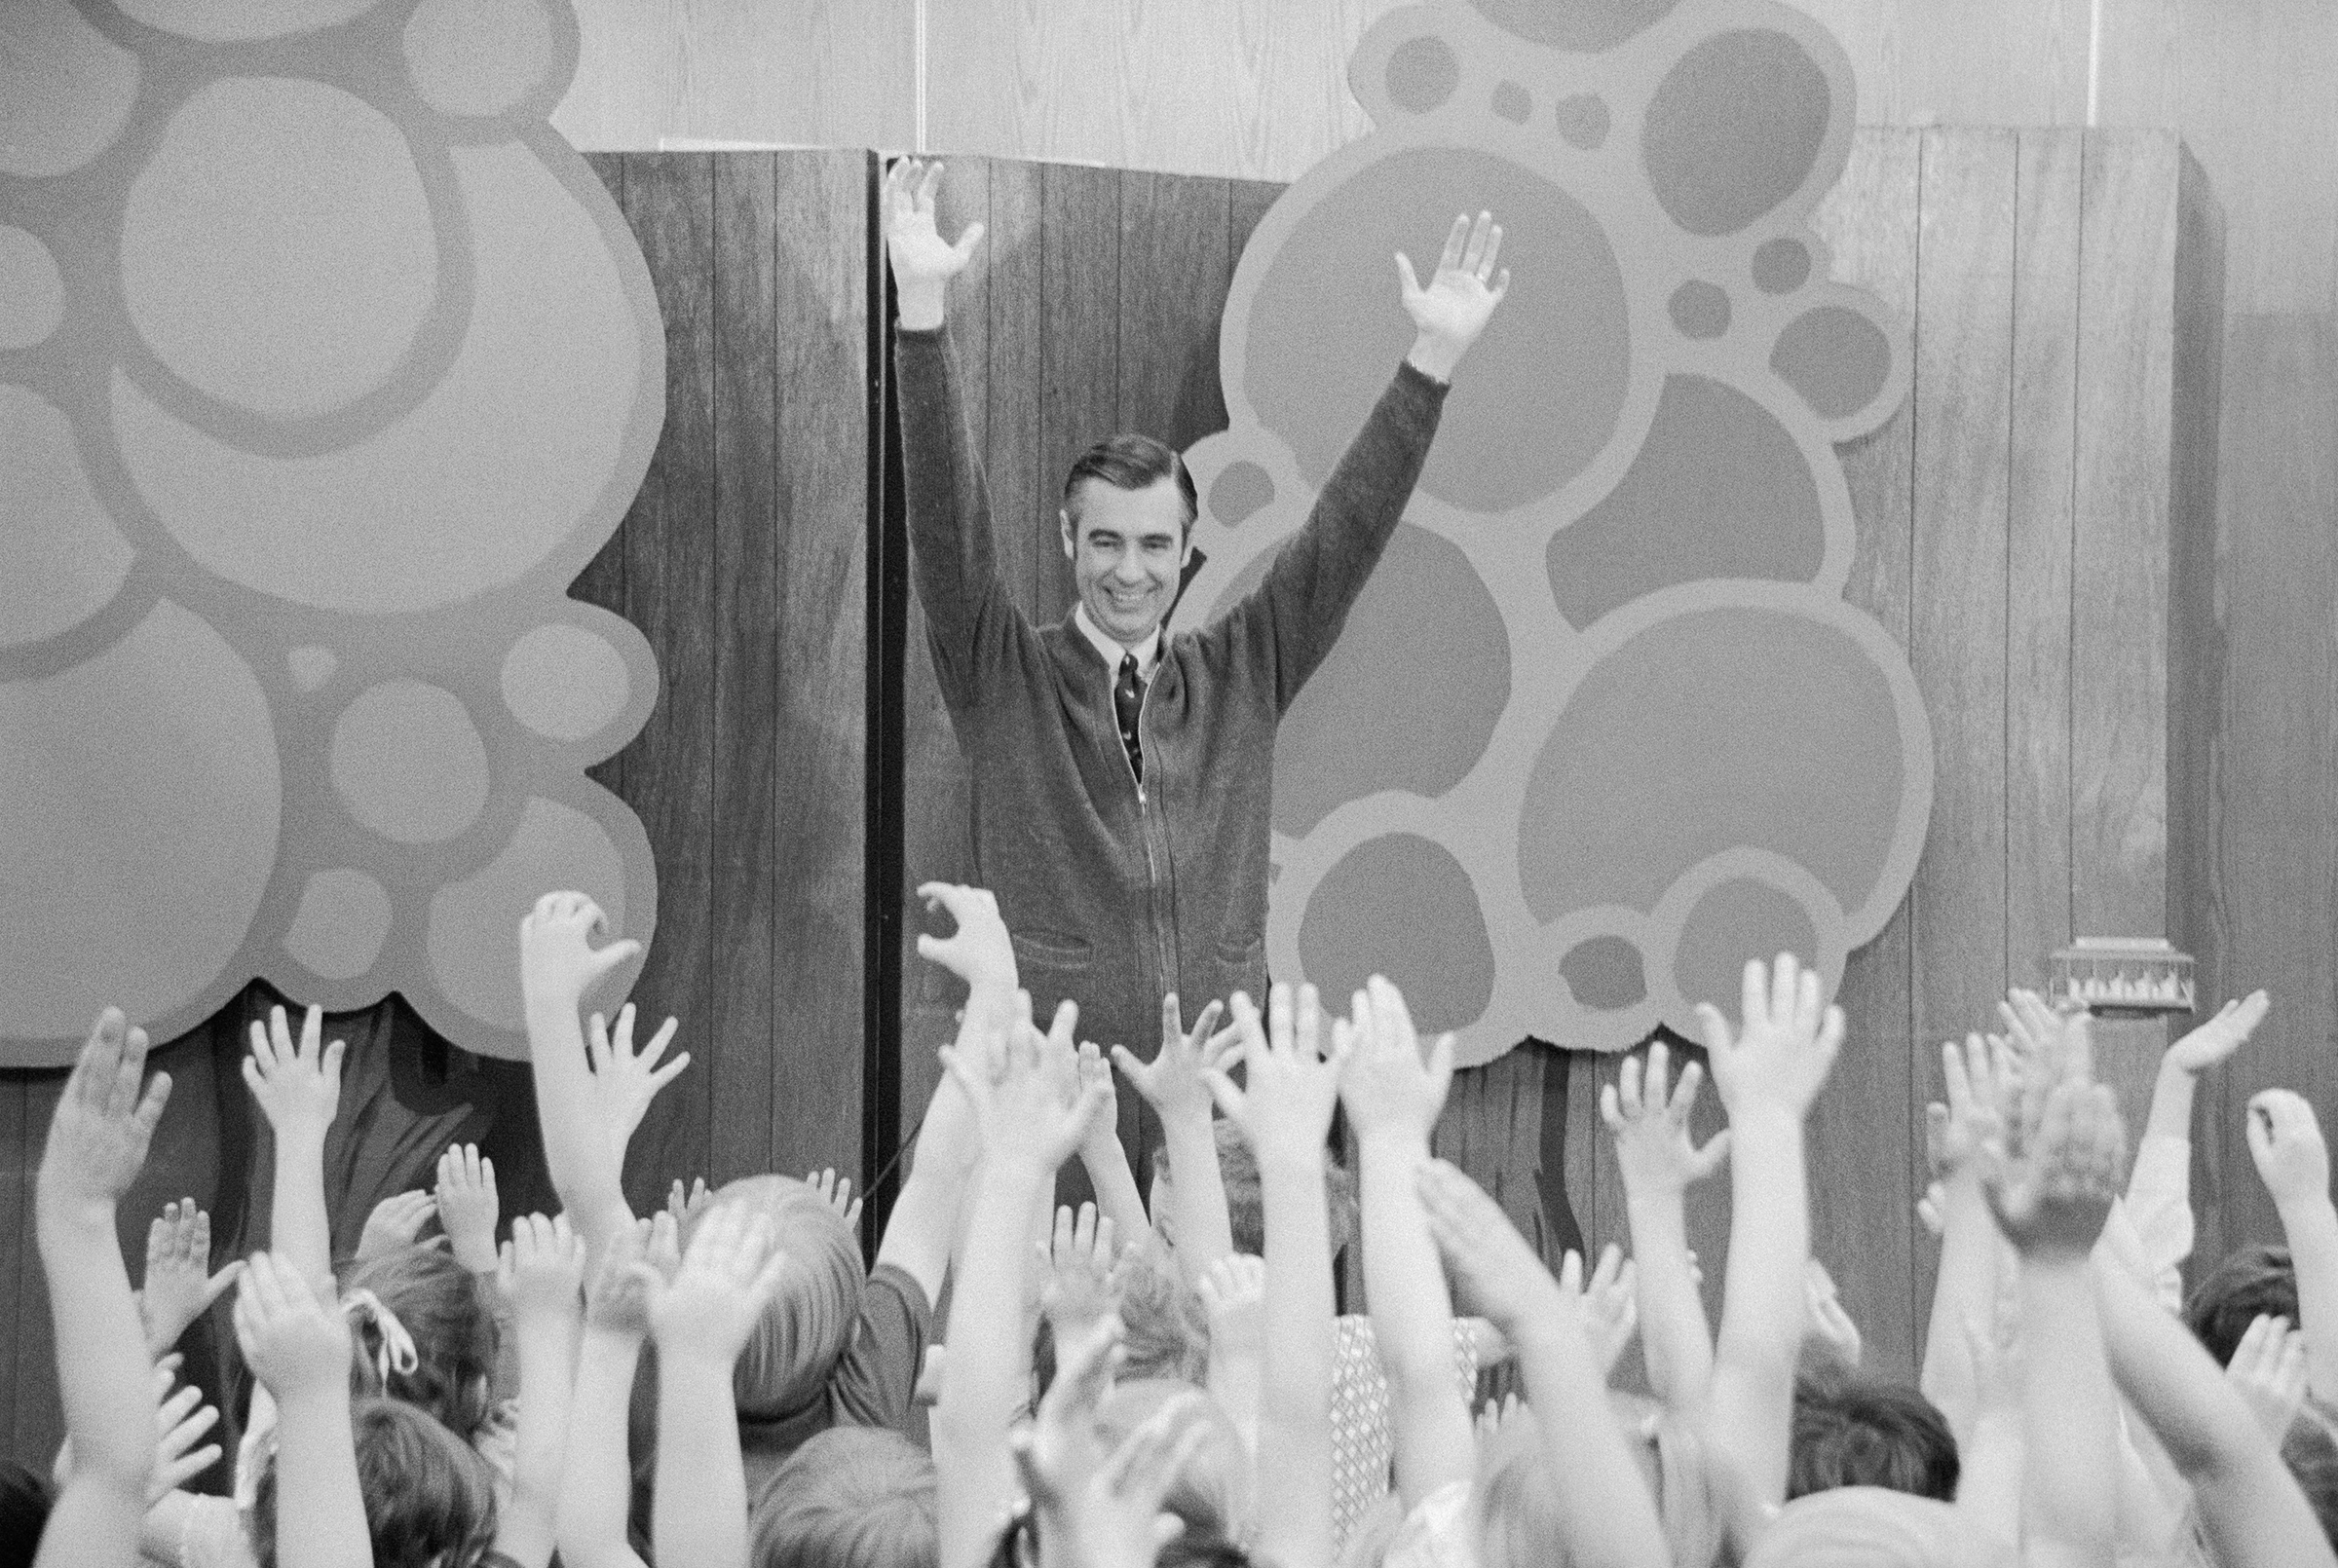 Fred Rogers of "Mister Rogers' Neighborhood" entertains children during a Mister Rogers' Day celebration. Several thousand children from the surrounding states attended the event held at the University of South Dakota on May 26, 1973